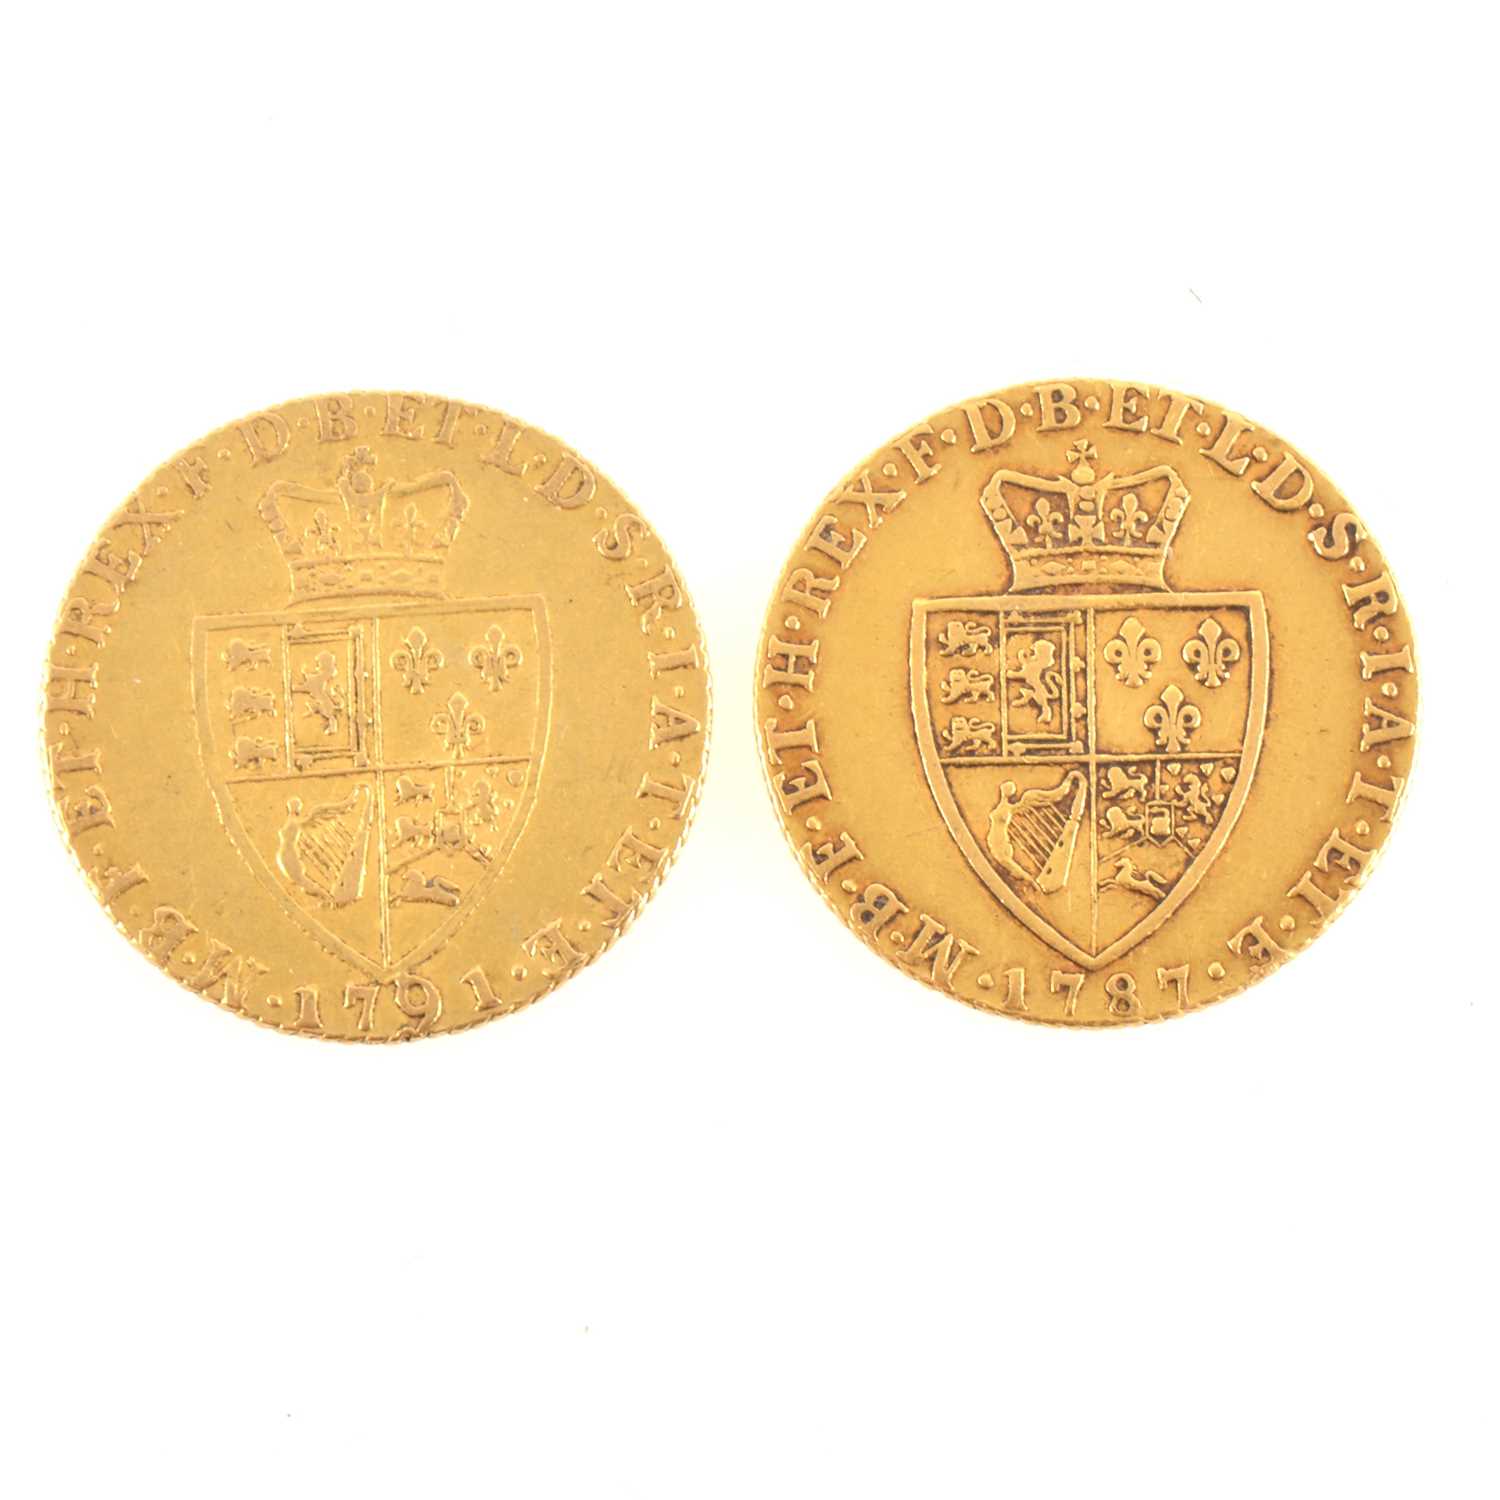 Lot 242 - Two Gold Spade Guineas, George III, 1787, 1791.